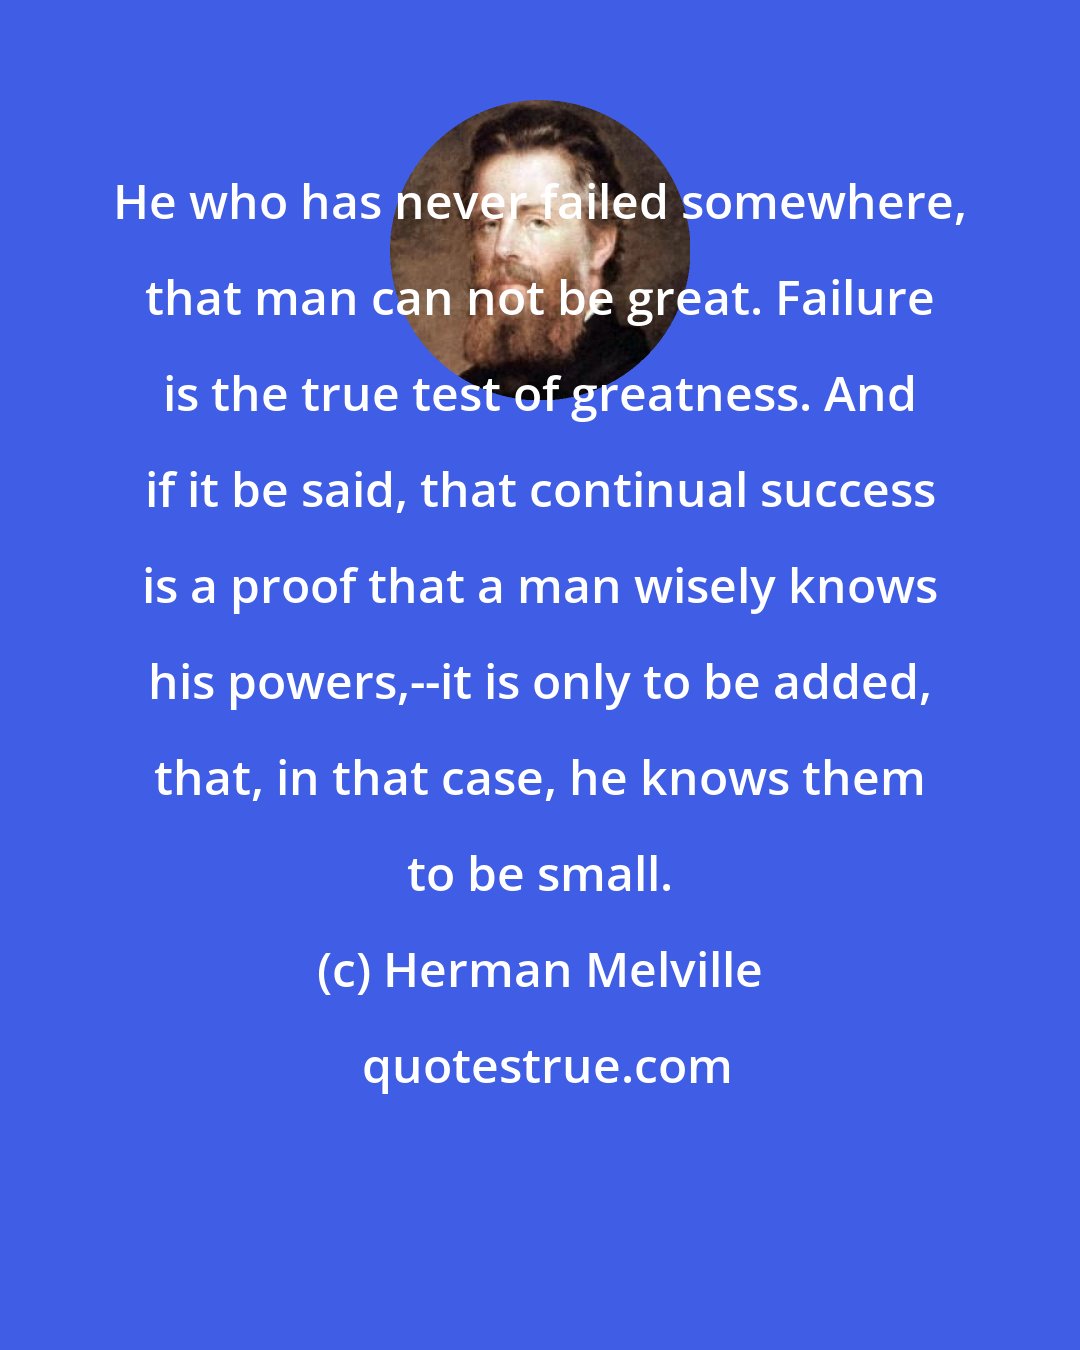 Herman Melville: He who has never failed somewhere, that man can not be great. Failure is the true test of greatness. And if it be said, that continual success is a proof that a man wisely knows his powers,--it is only to be added, that, in that case, he knows them to be small.